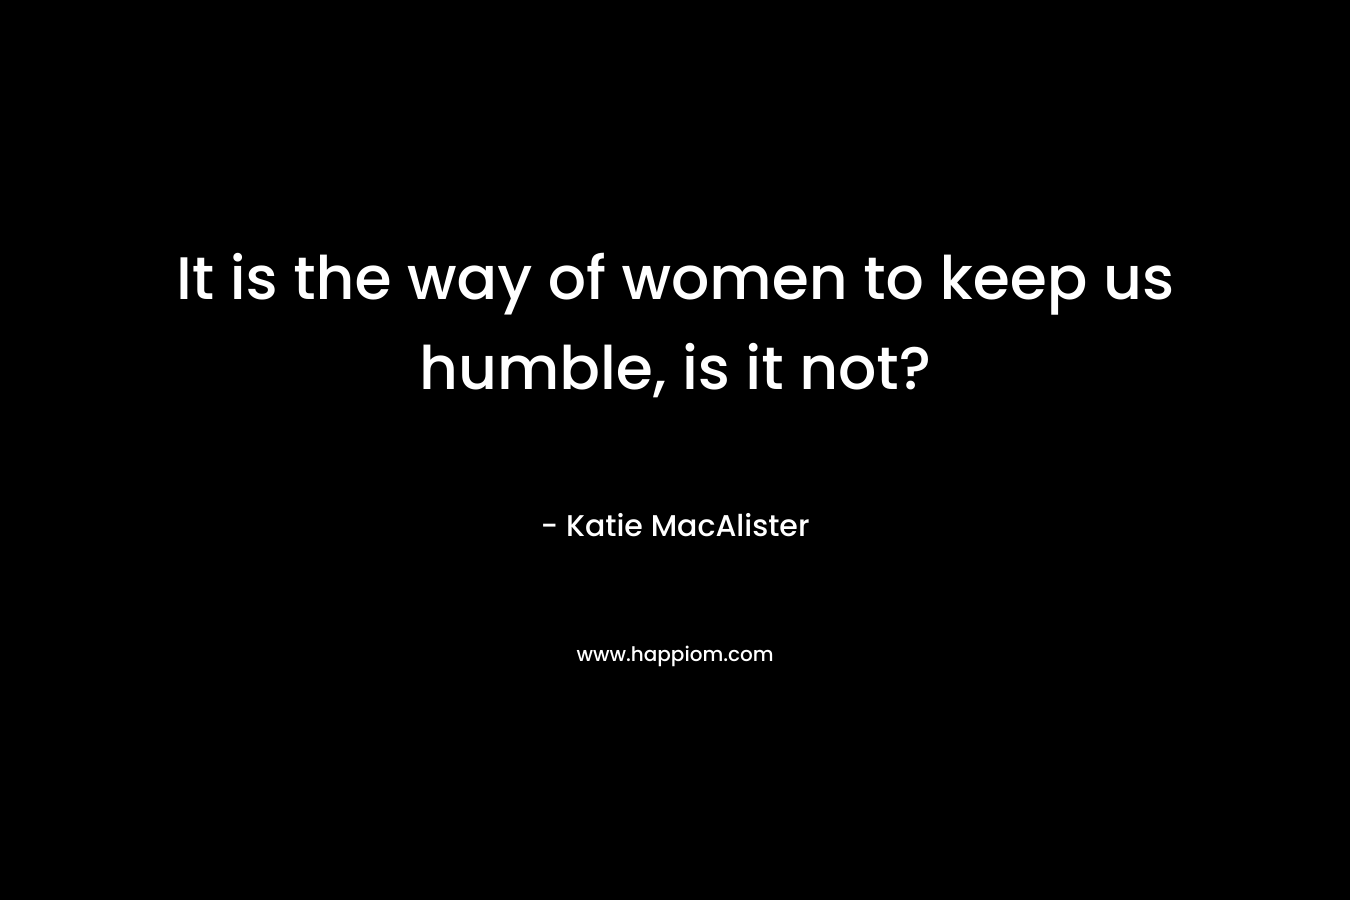 It is the way of women to keep us humble, is it not?